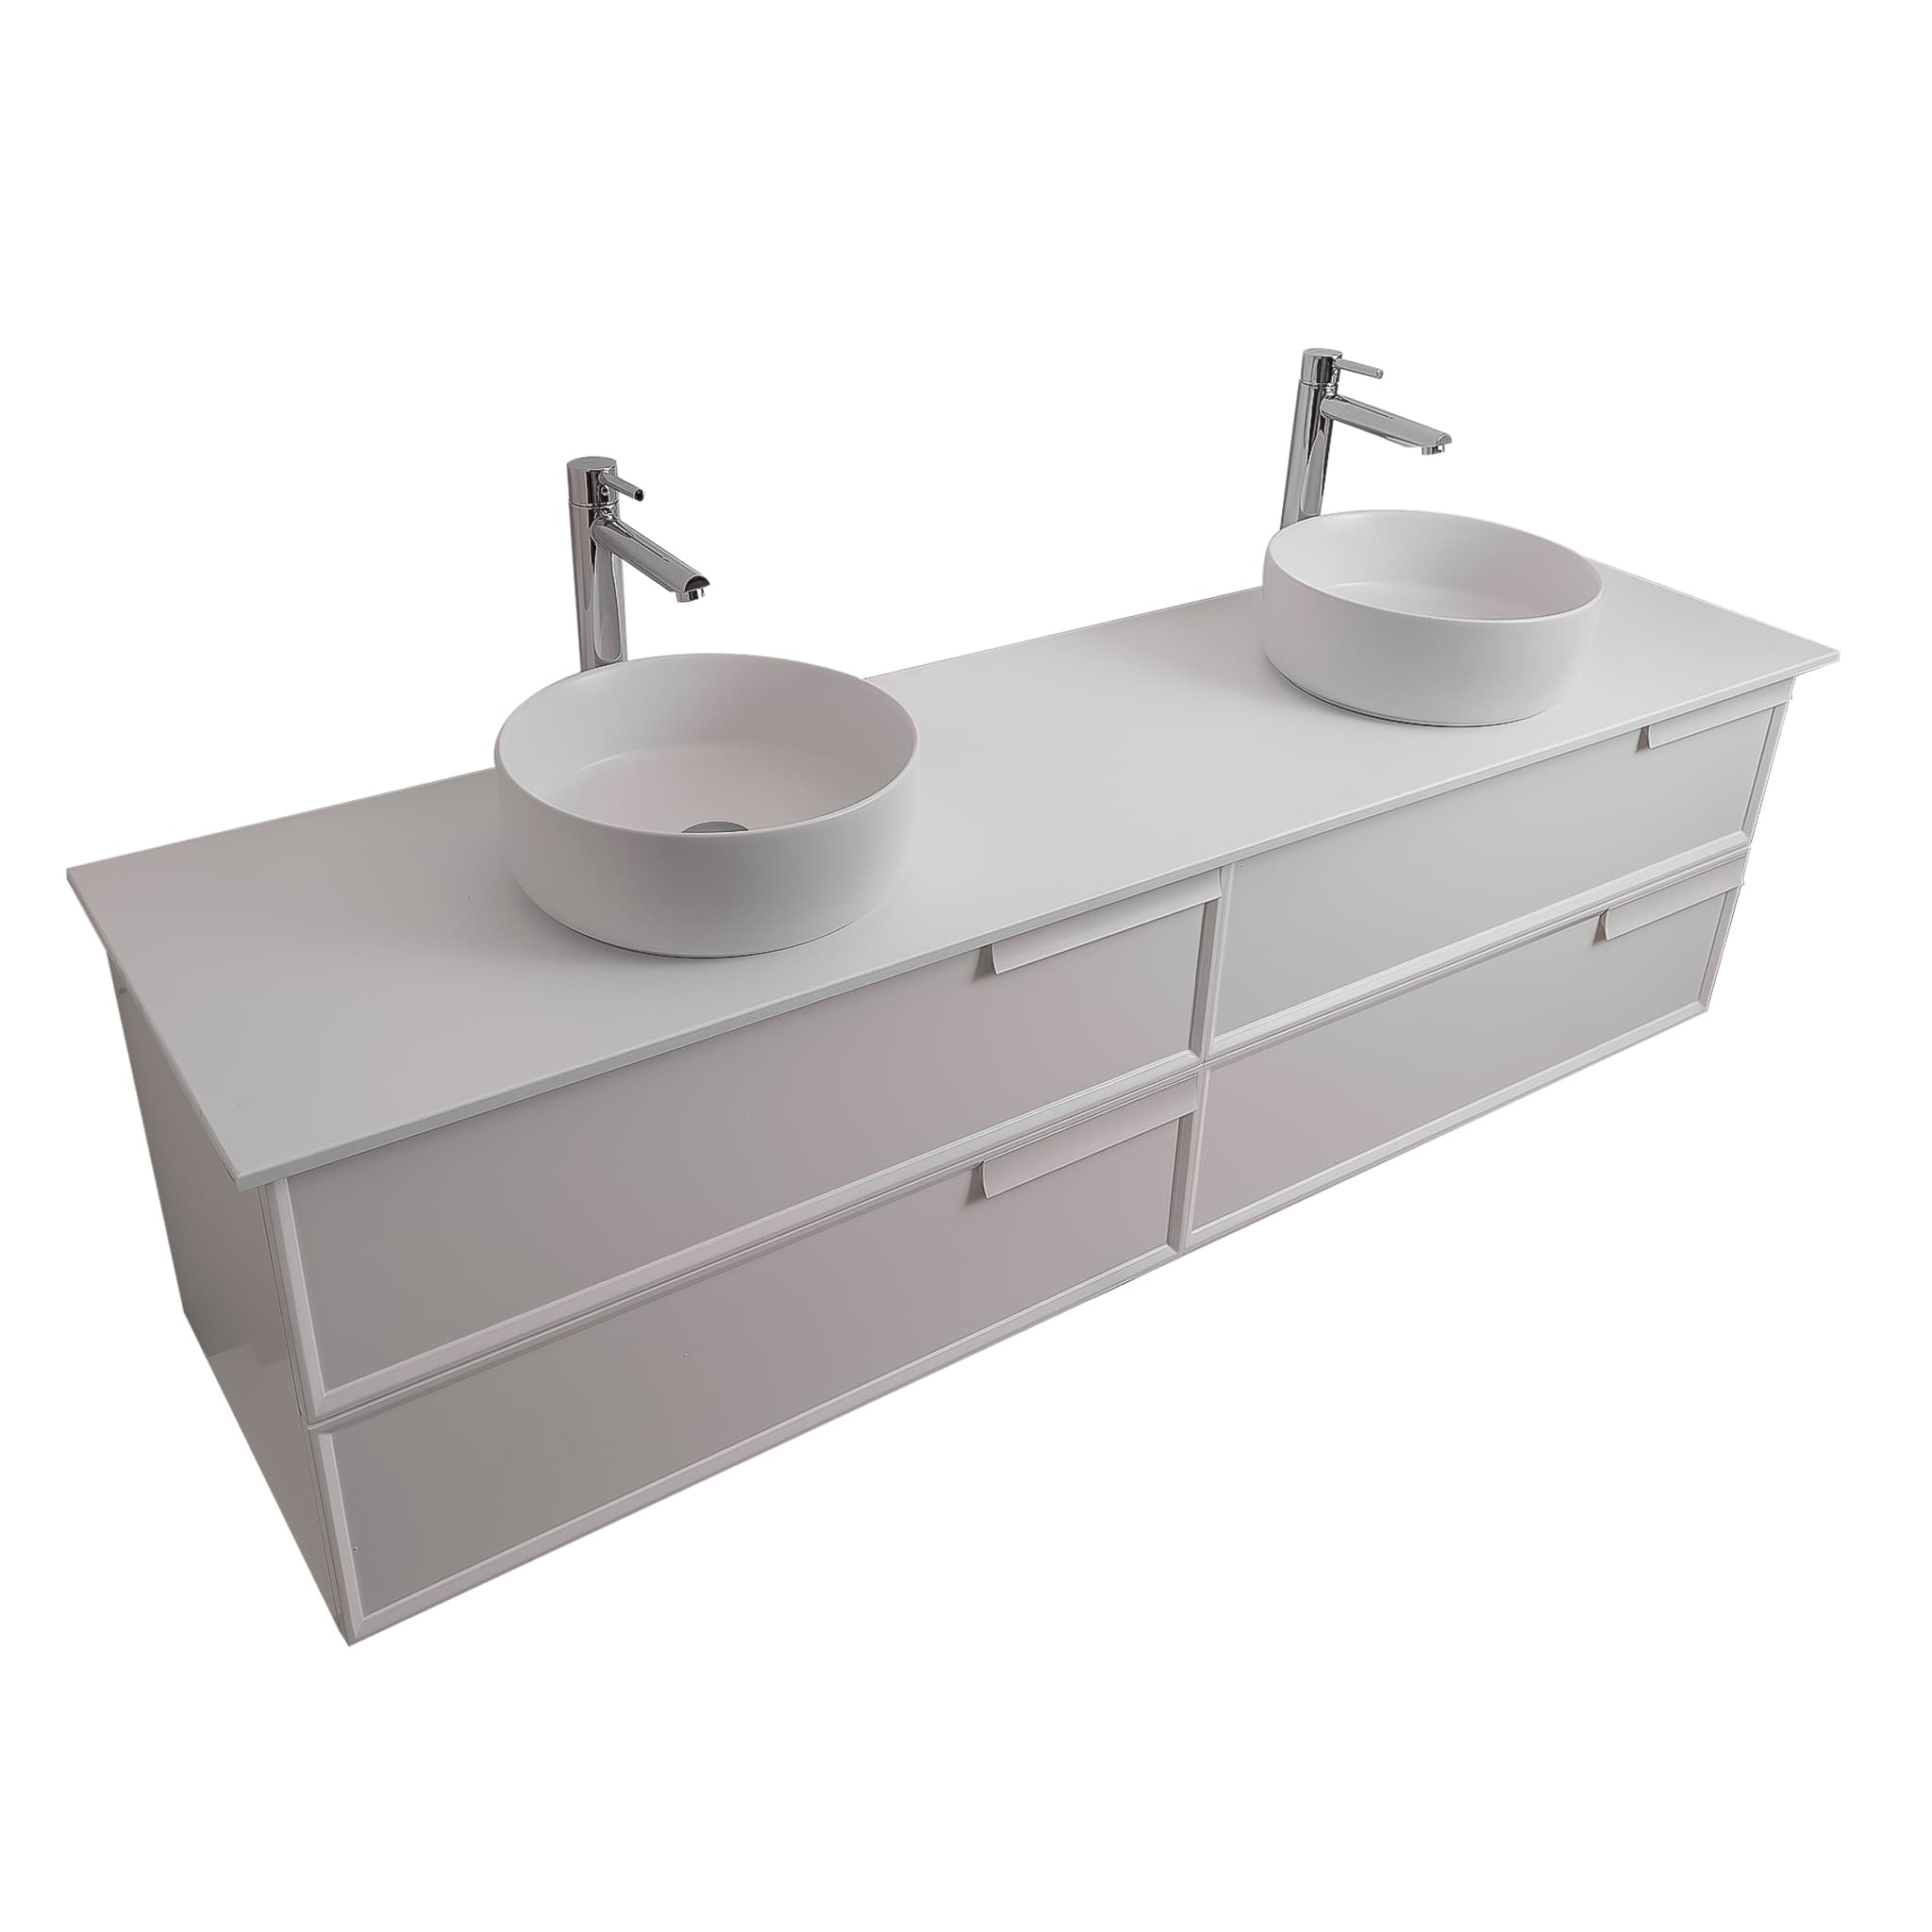 Garda 63 Matte White Cabinet, Ares White Top and Two Ares White Ceramic Basin, Wall Mounted Modern Vanity Set